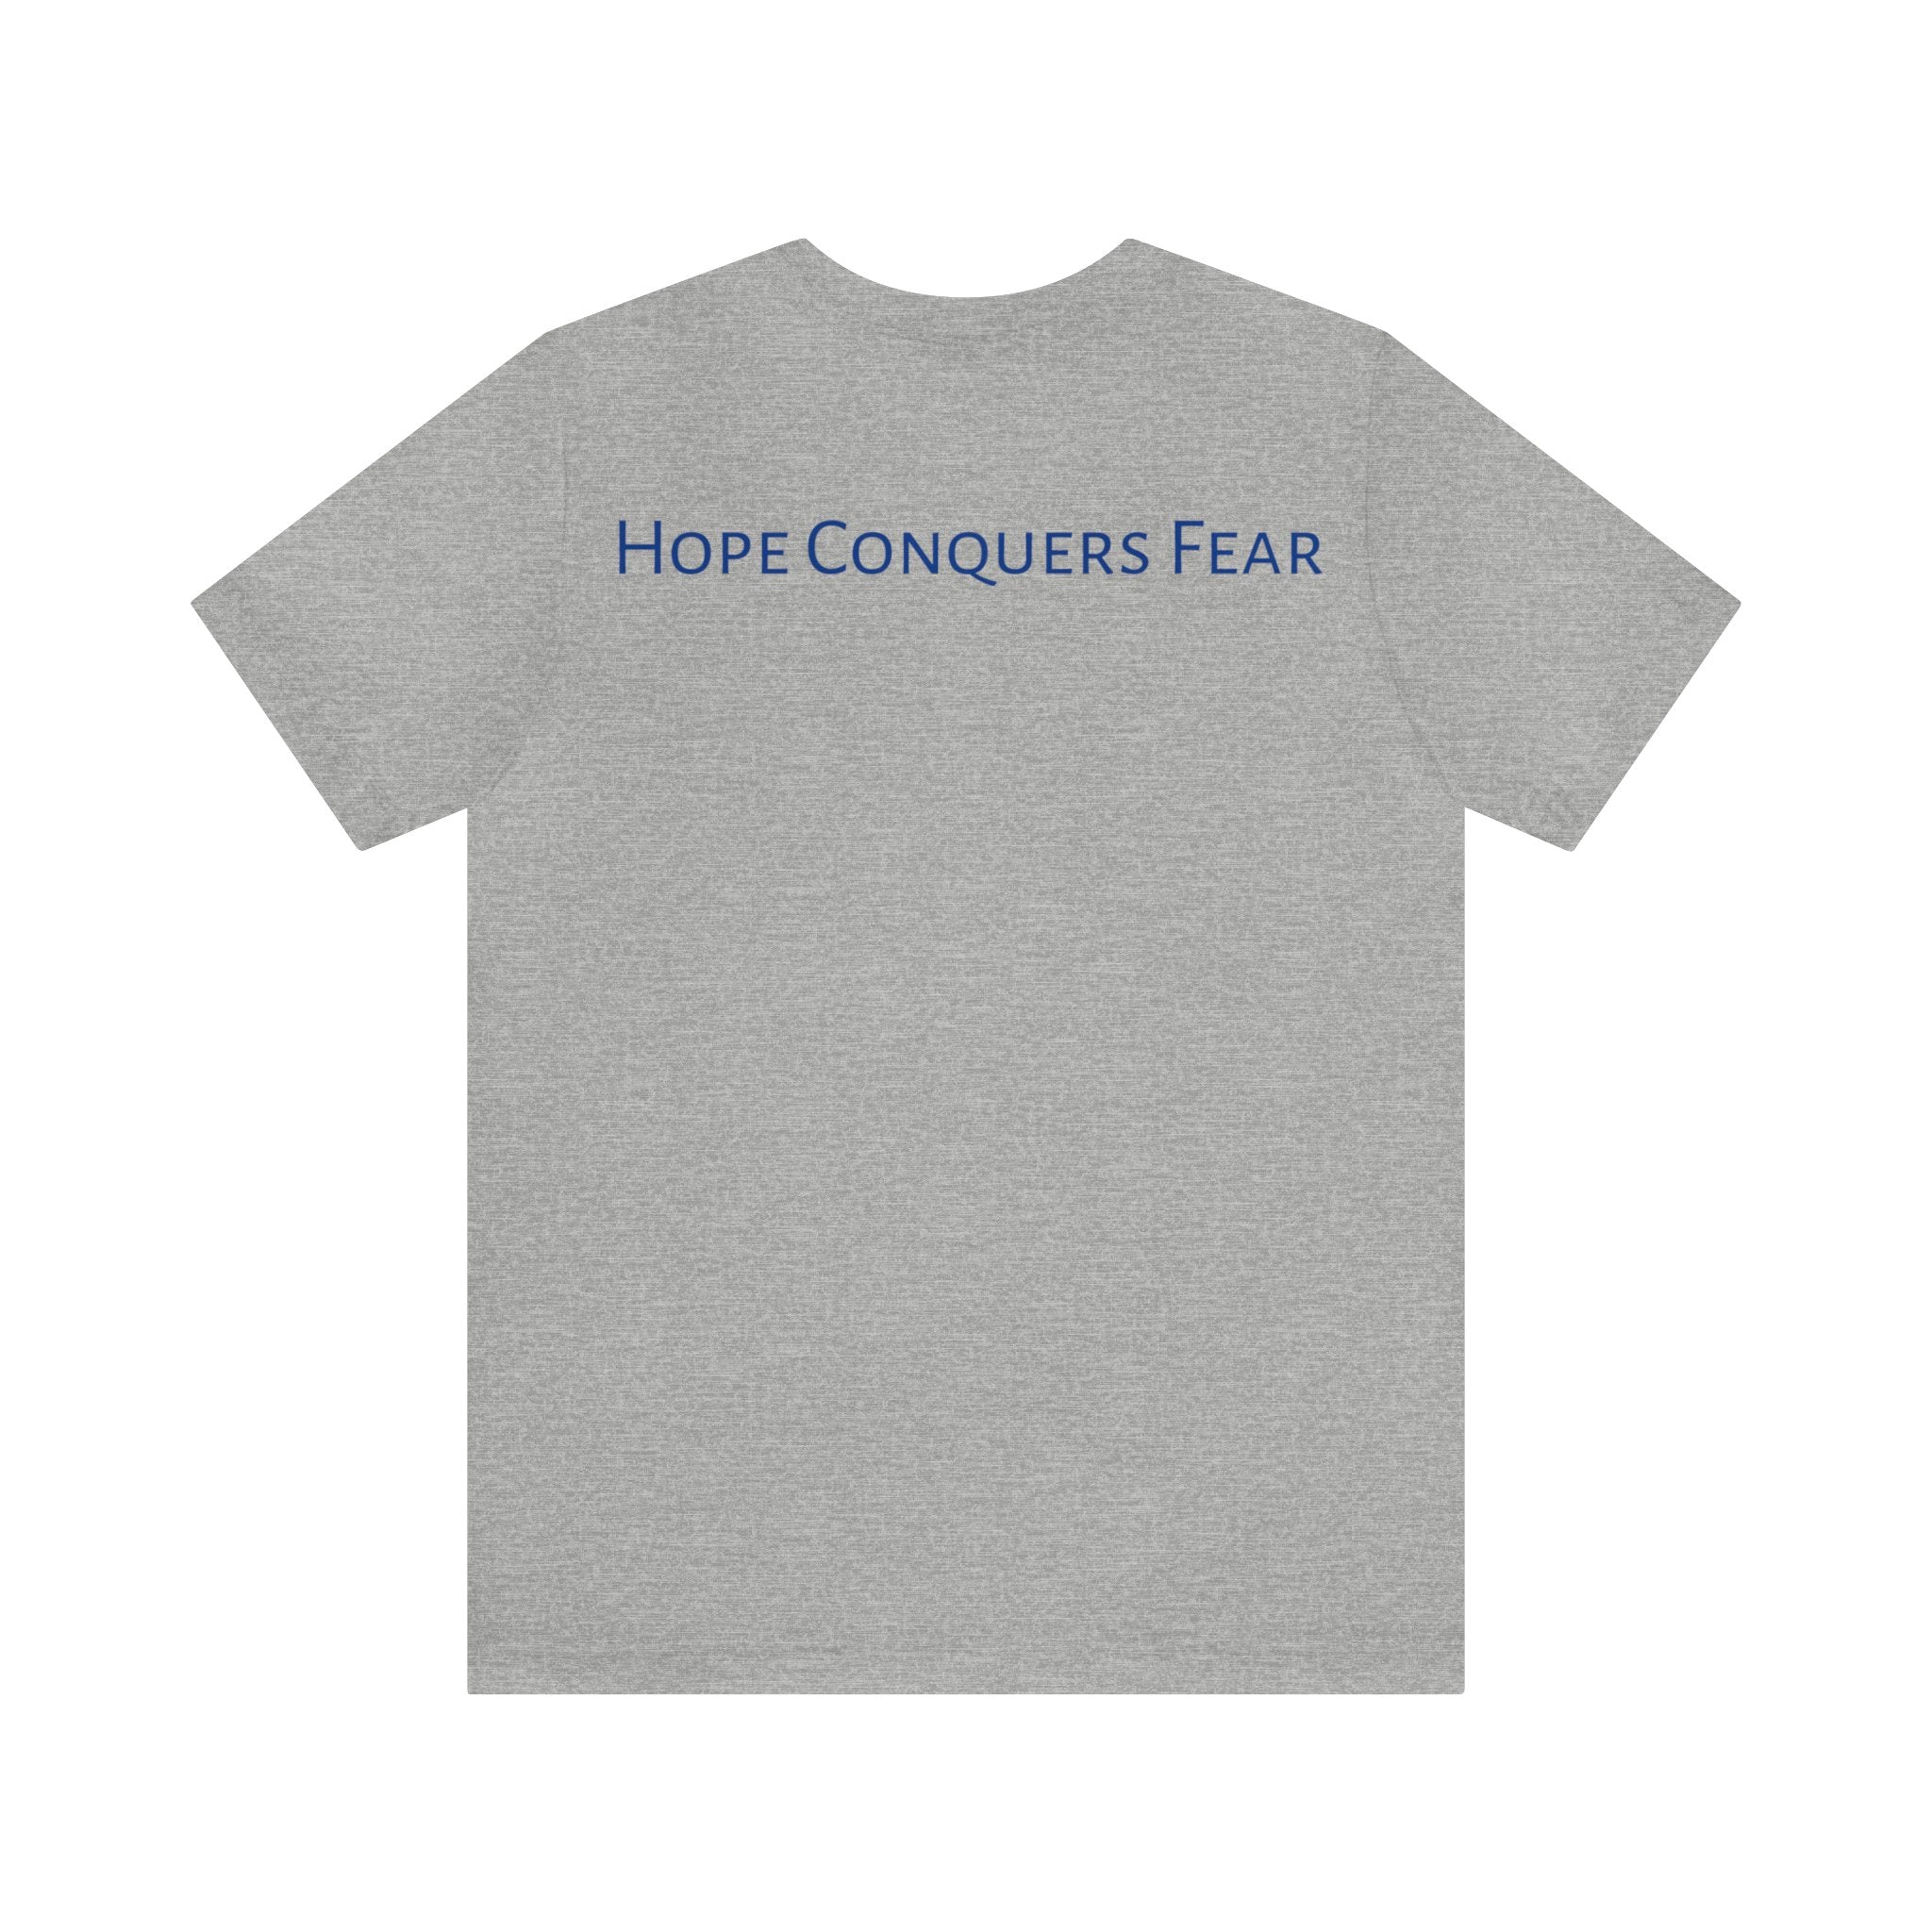 Hope Conquers Fear Jersey Tee - Bella+Canvas 3001 Heather Ice Blue Airlume Cotton Bella+Canvas 3001 Crew Neckline Jersey Short Sleeve Lightweight Fabric Mental Health Support Retail Fit Tear-away Label Tee Unisex Tee T-Shirt 2385968971602936336_2048 Printify